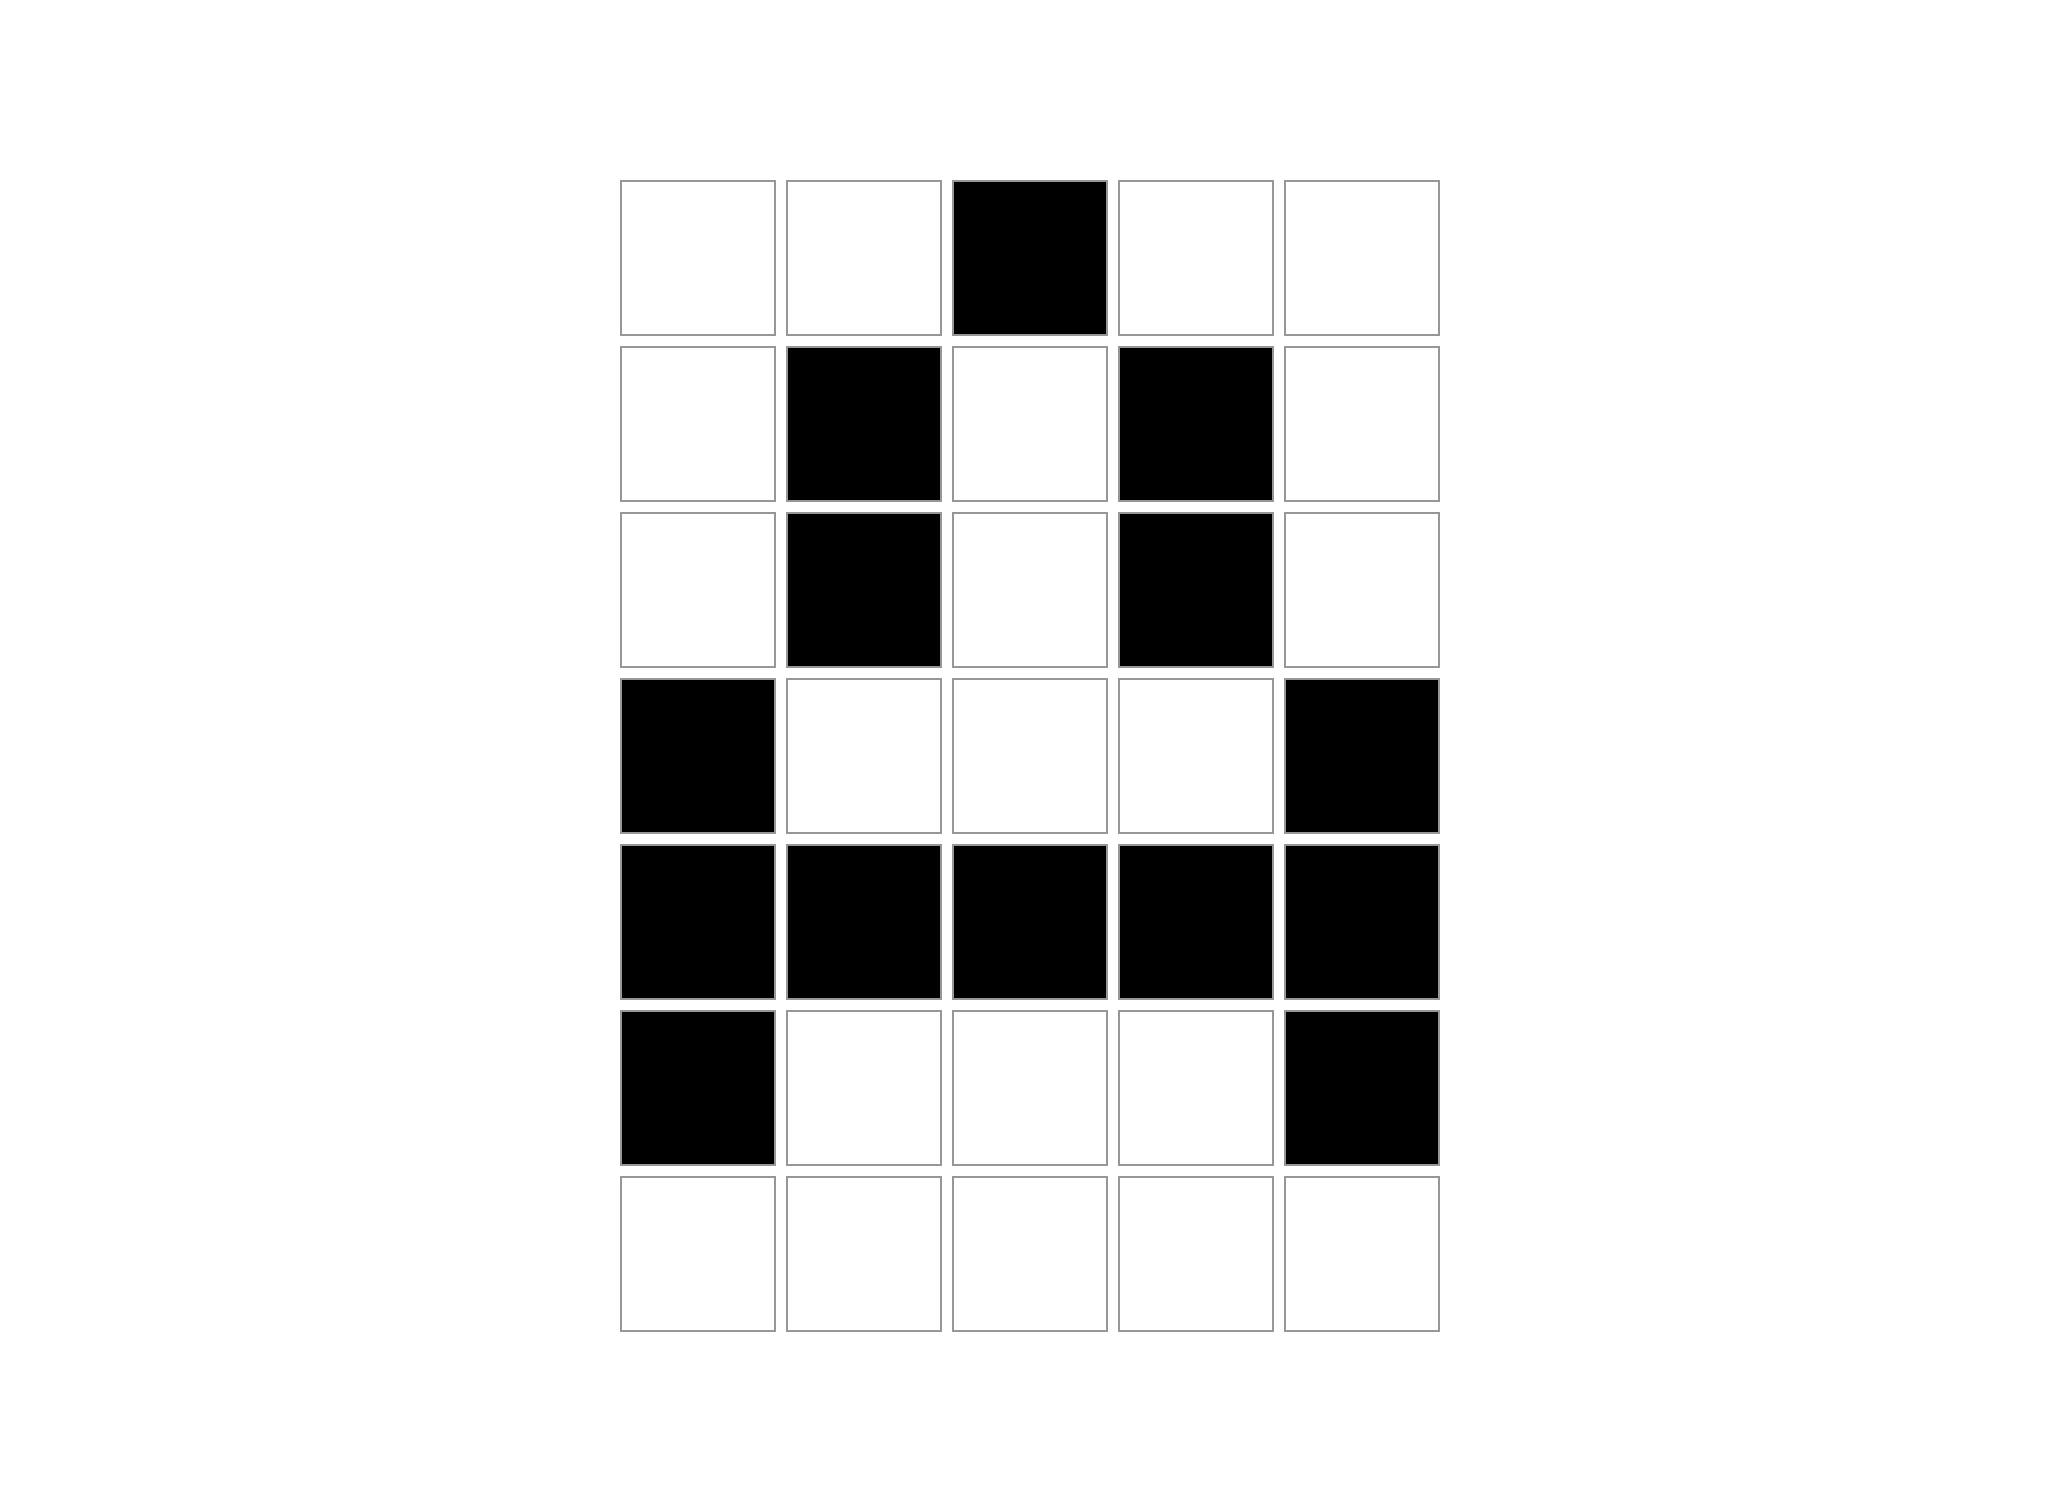 Bitmap-depiction of the letter “A” on a 5x7 grid.